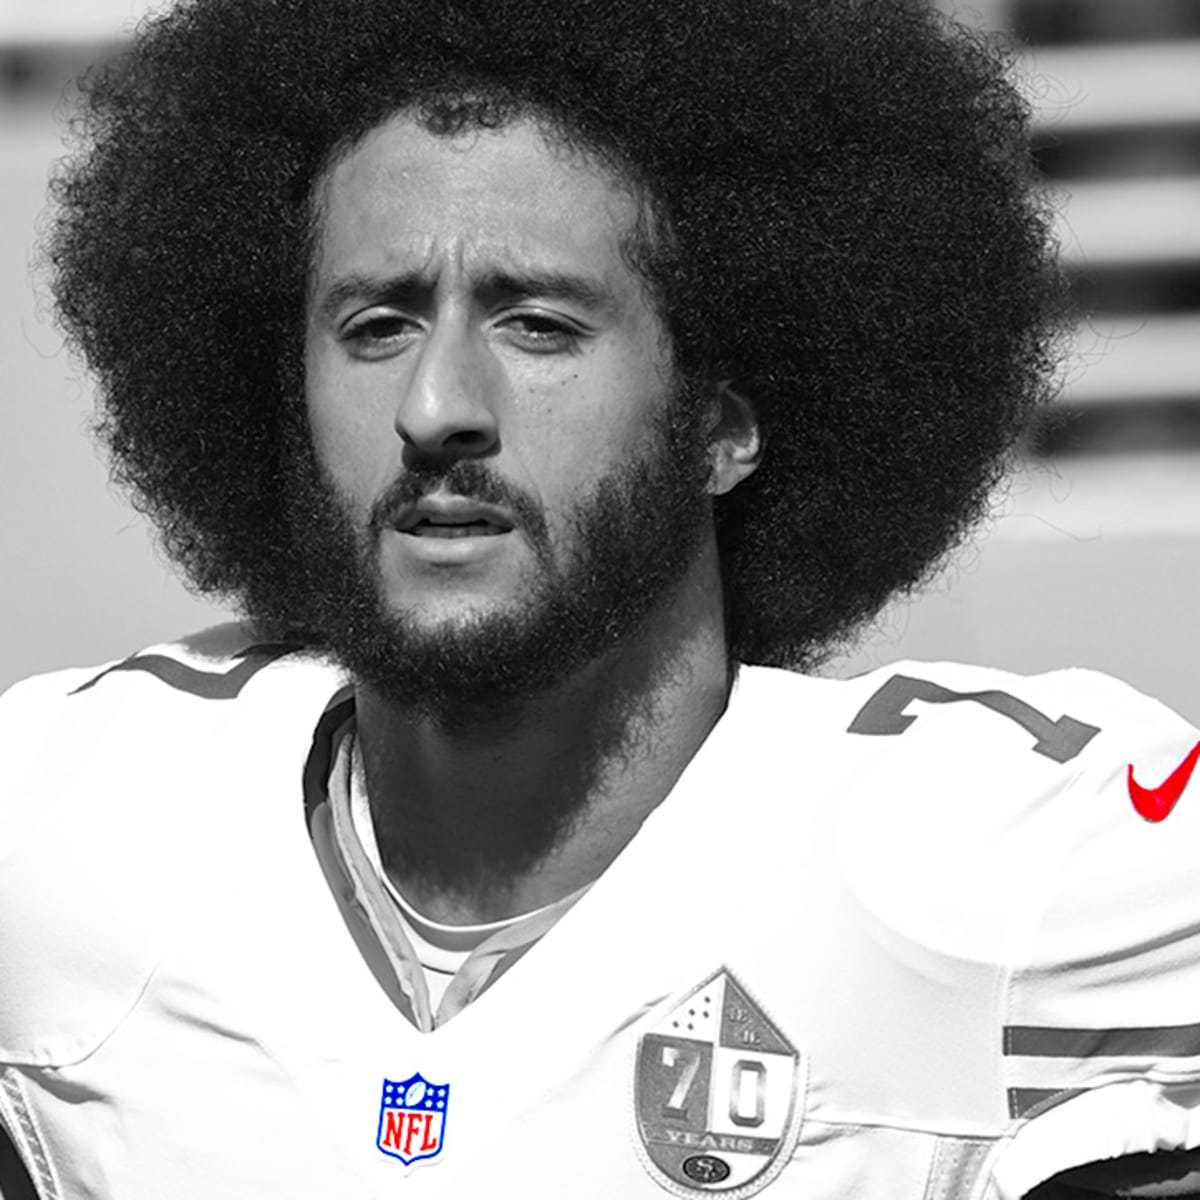 toekomst desinfecteren Doe mijn best Why Nike and NFL Are Treating Kaepernick Differently - Sports Illustrated